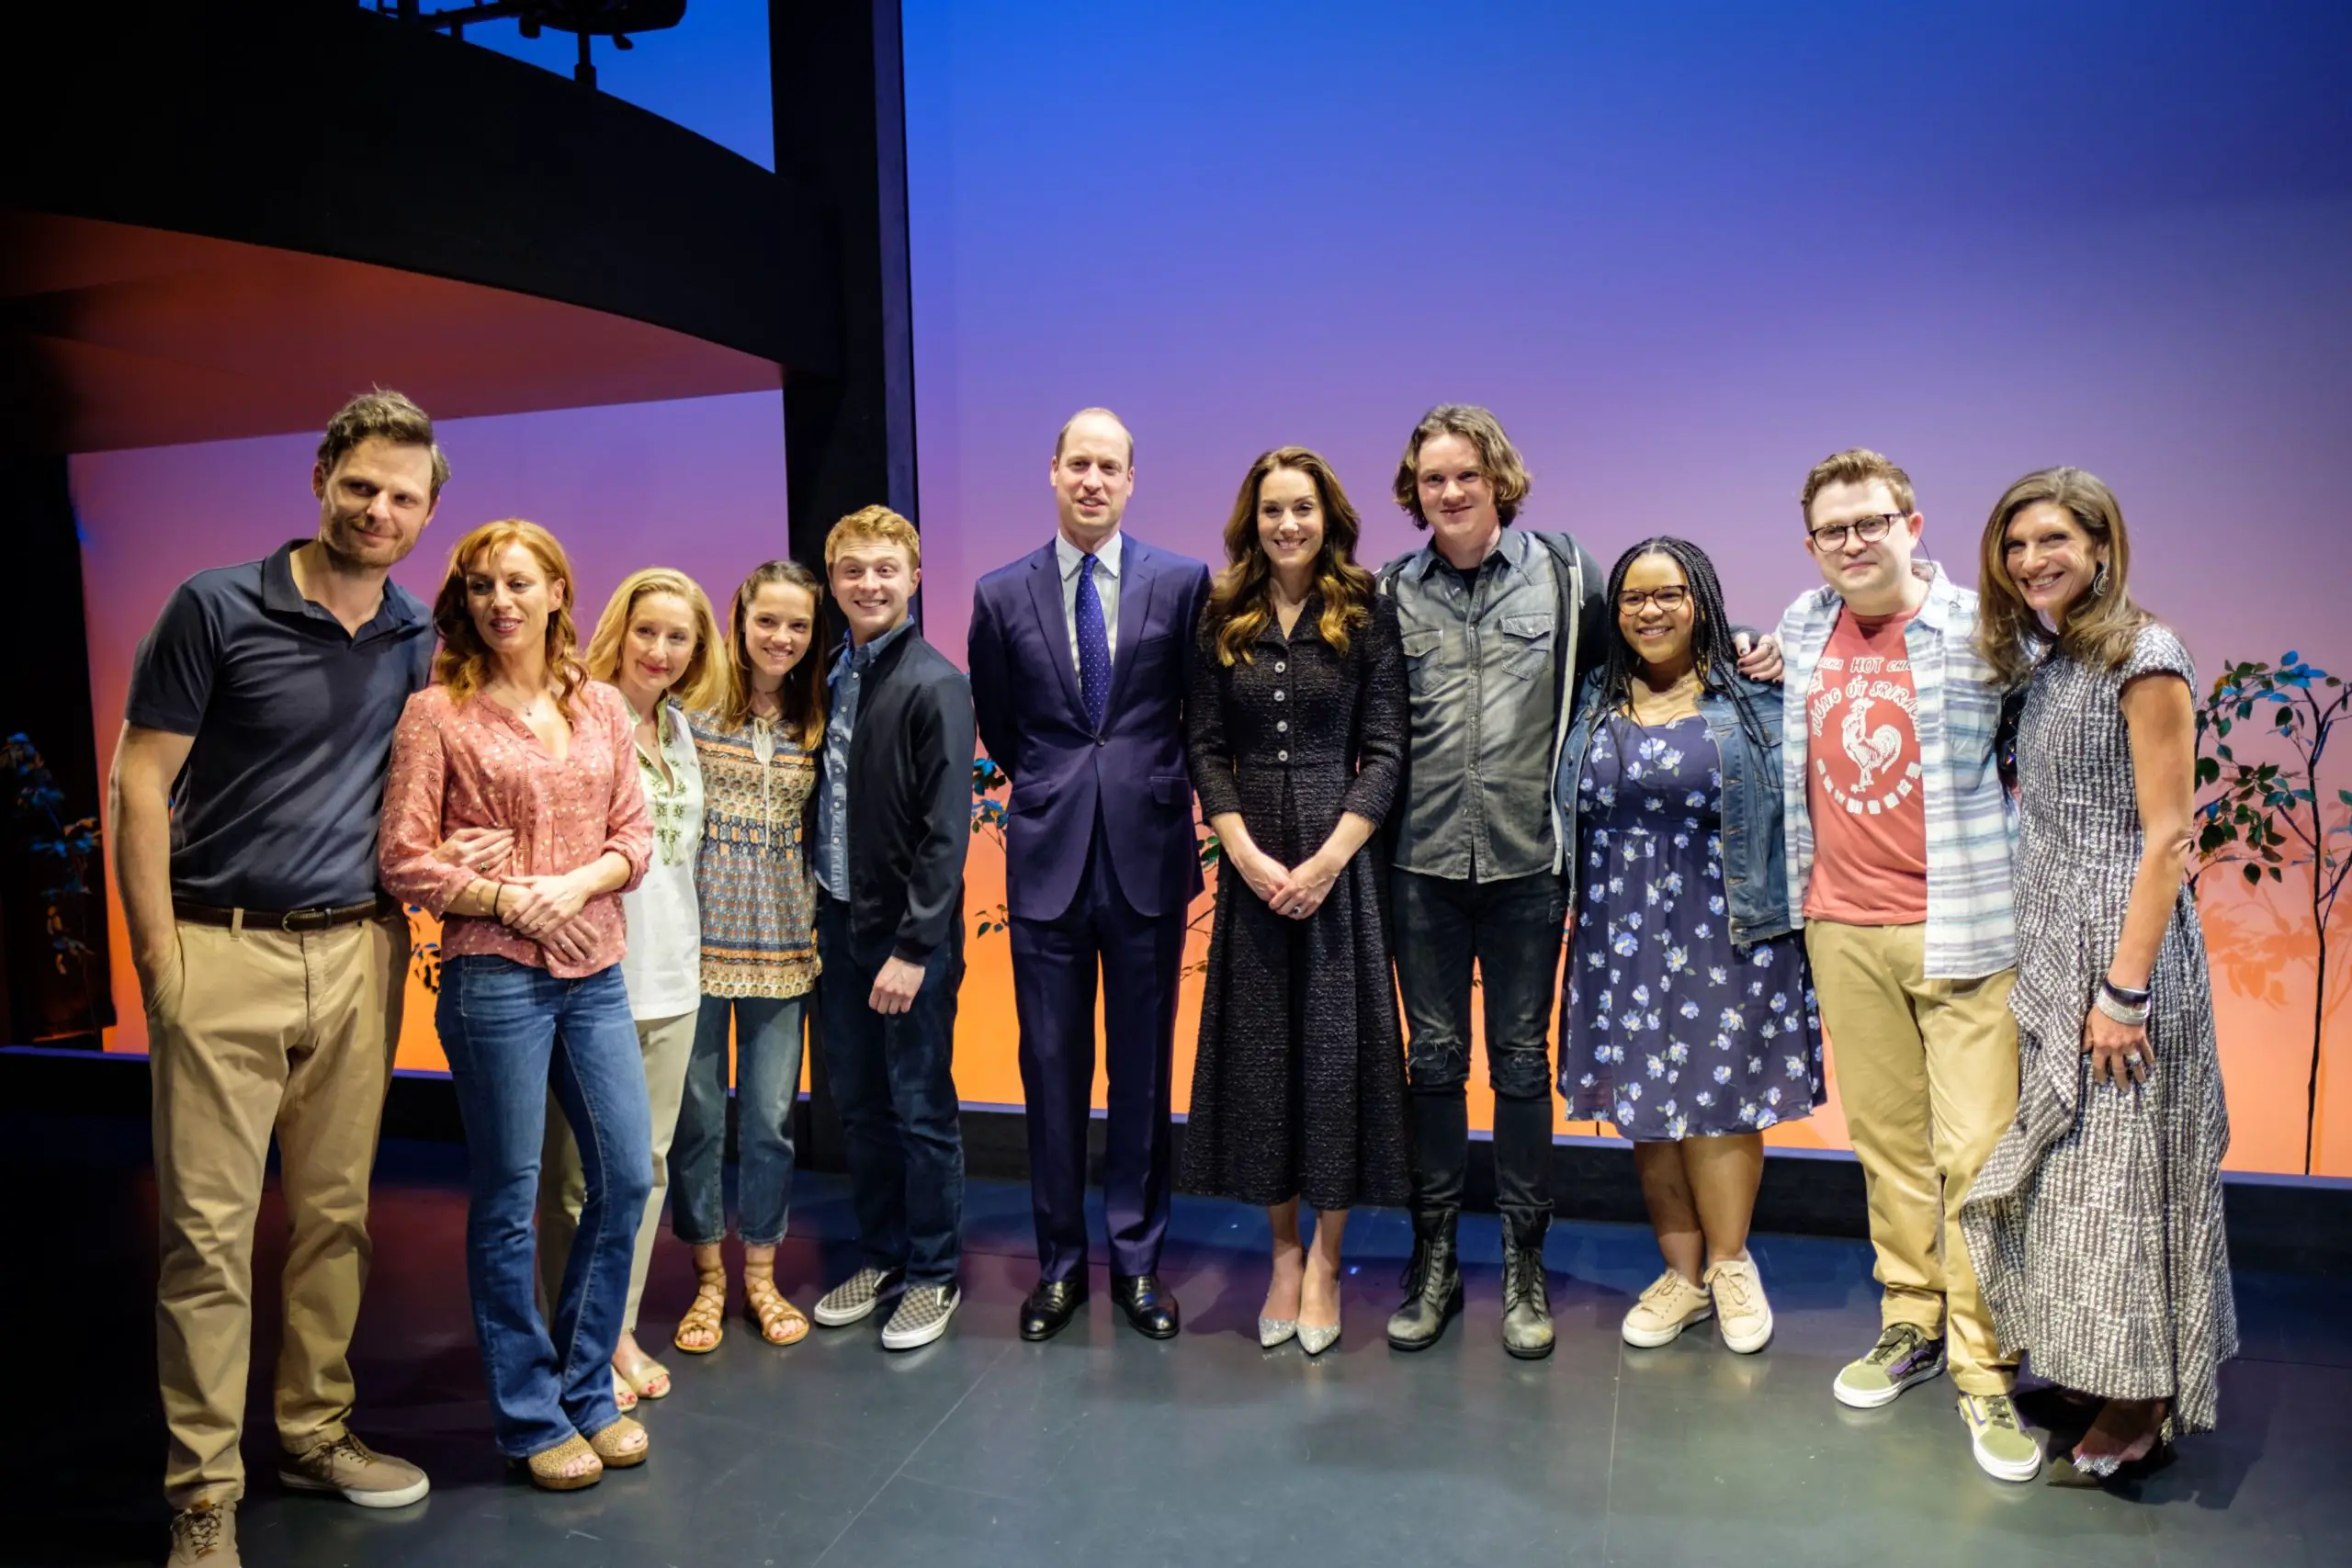 The Duke and Duchess of Cambridge attended a special performance of 'Dear Evan Hansen' at the Noël Coward Theatre which is being held in aid of The Royal Foundation